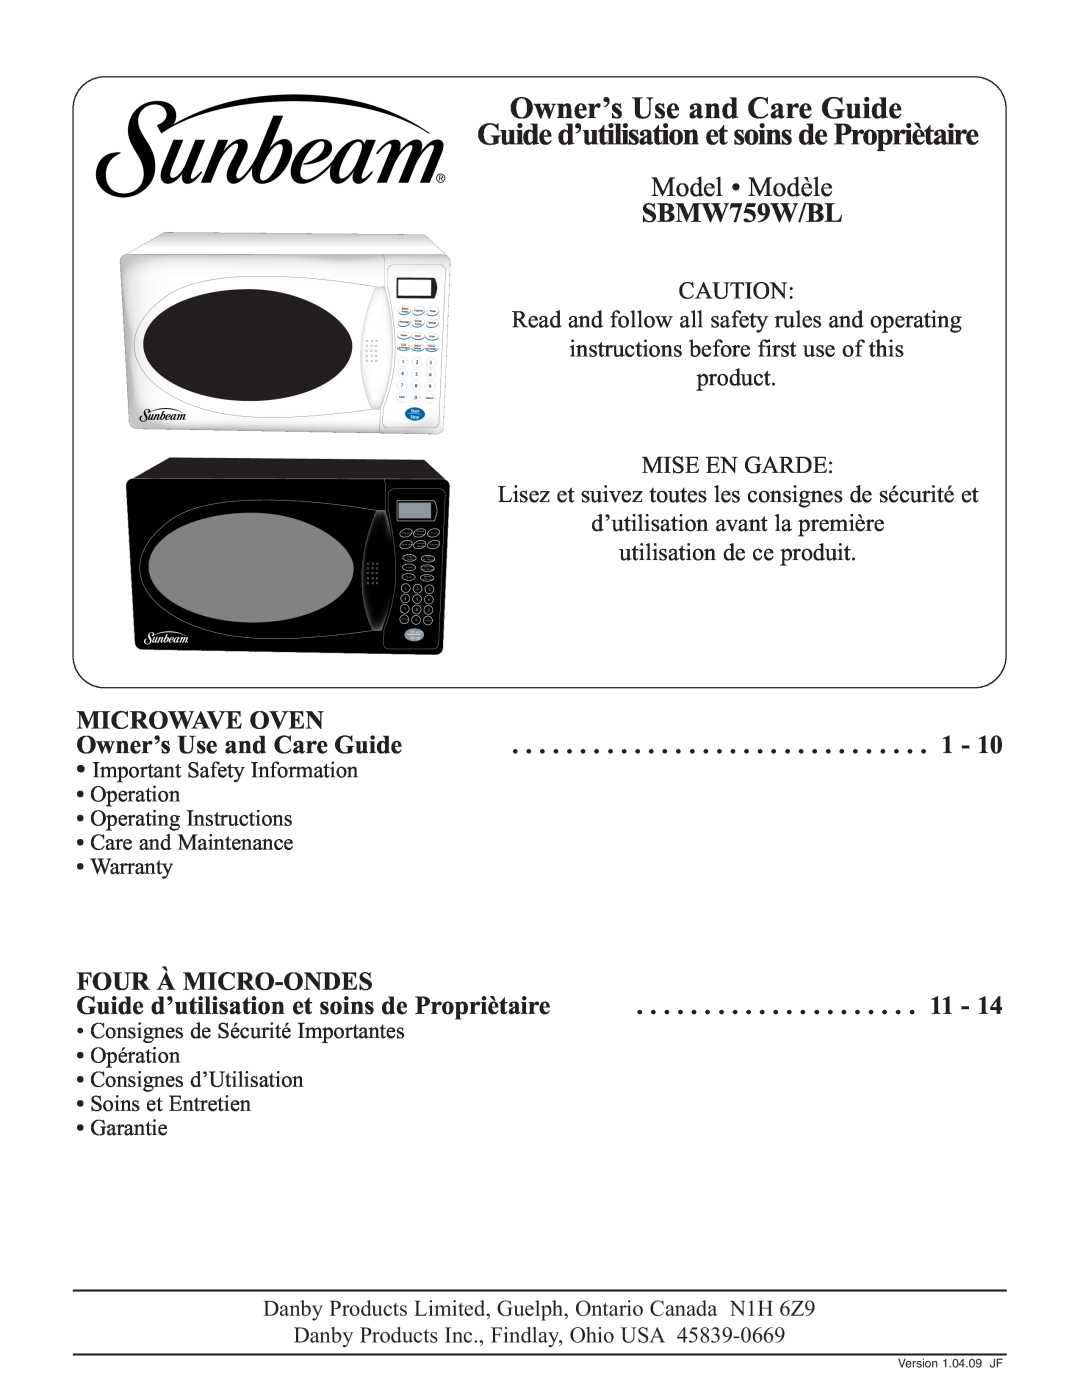 Sunbeam SBMW759W/BL warranty Model Modèle, Microwave Oven, Owner’s Use and Care Guide, Four À Micro-Ondes, Mise En Garde 